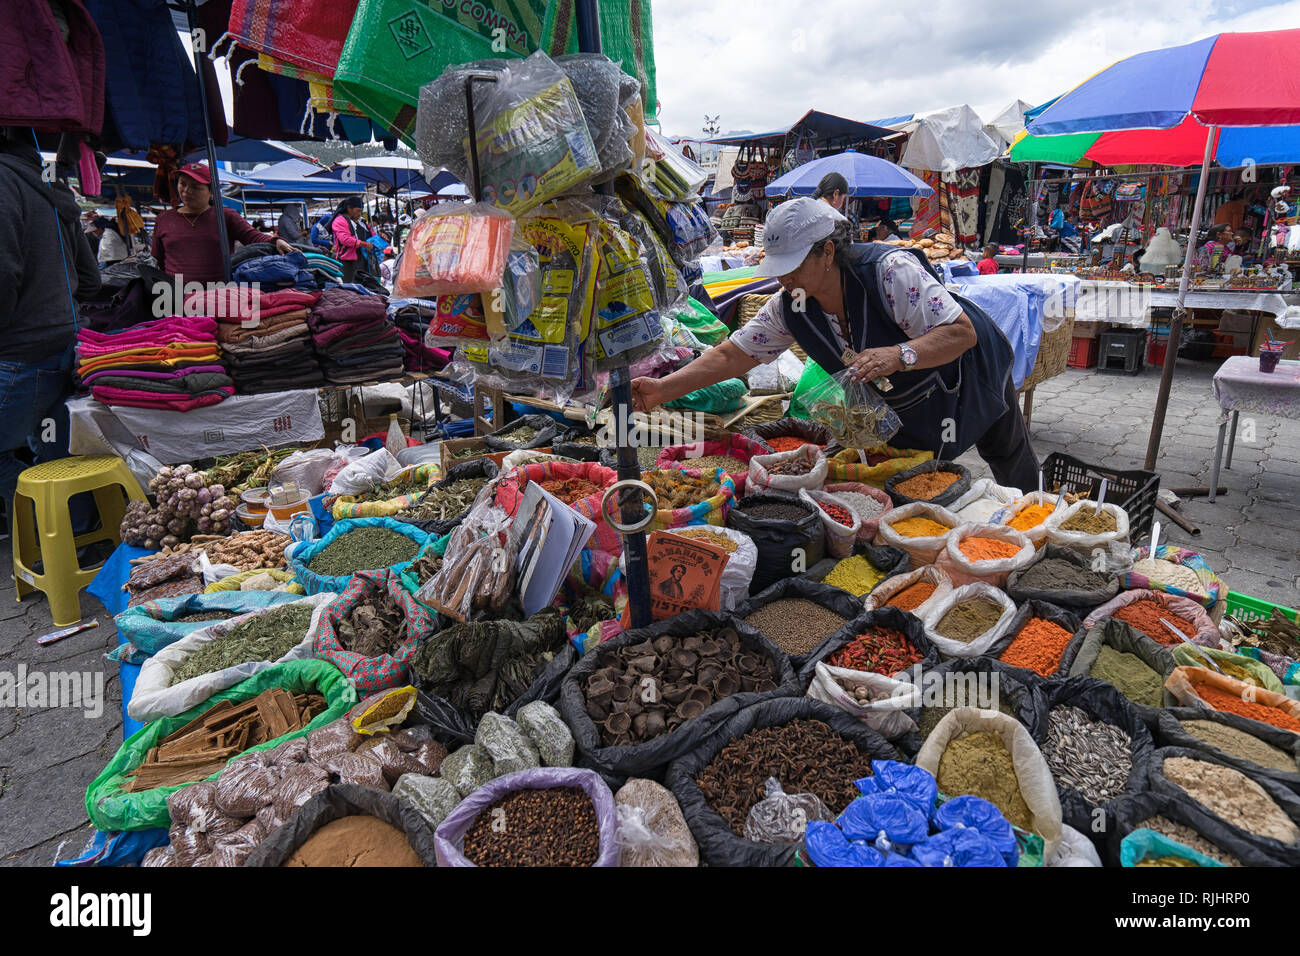 Otavalo, Ecuador - September 23, 2018: a street vendor selling locally spices and herbs in the Saturday open air market Stock Photo